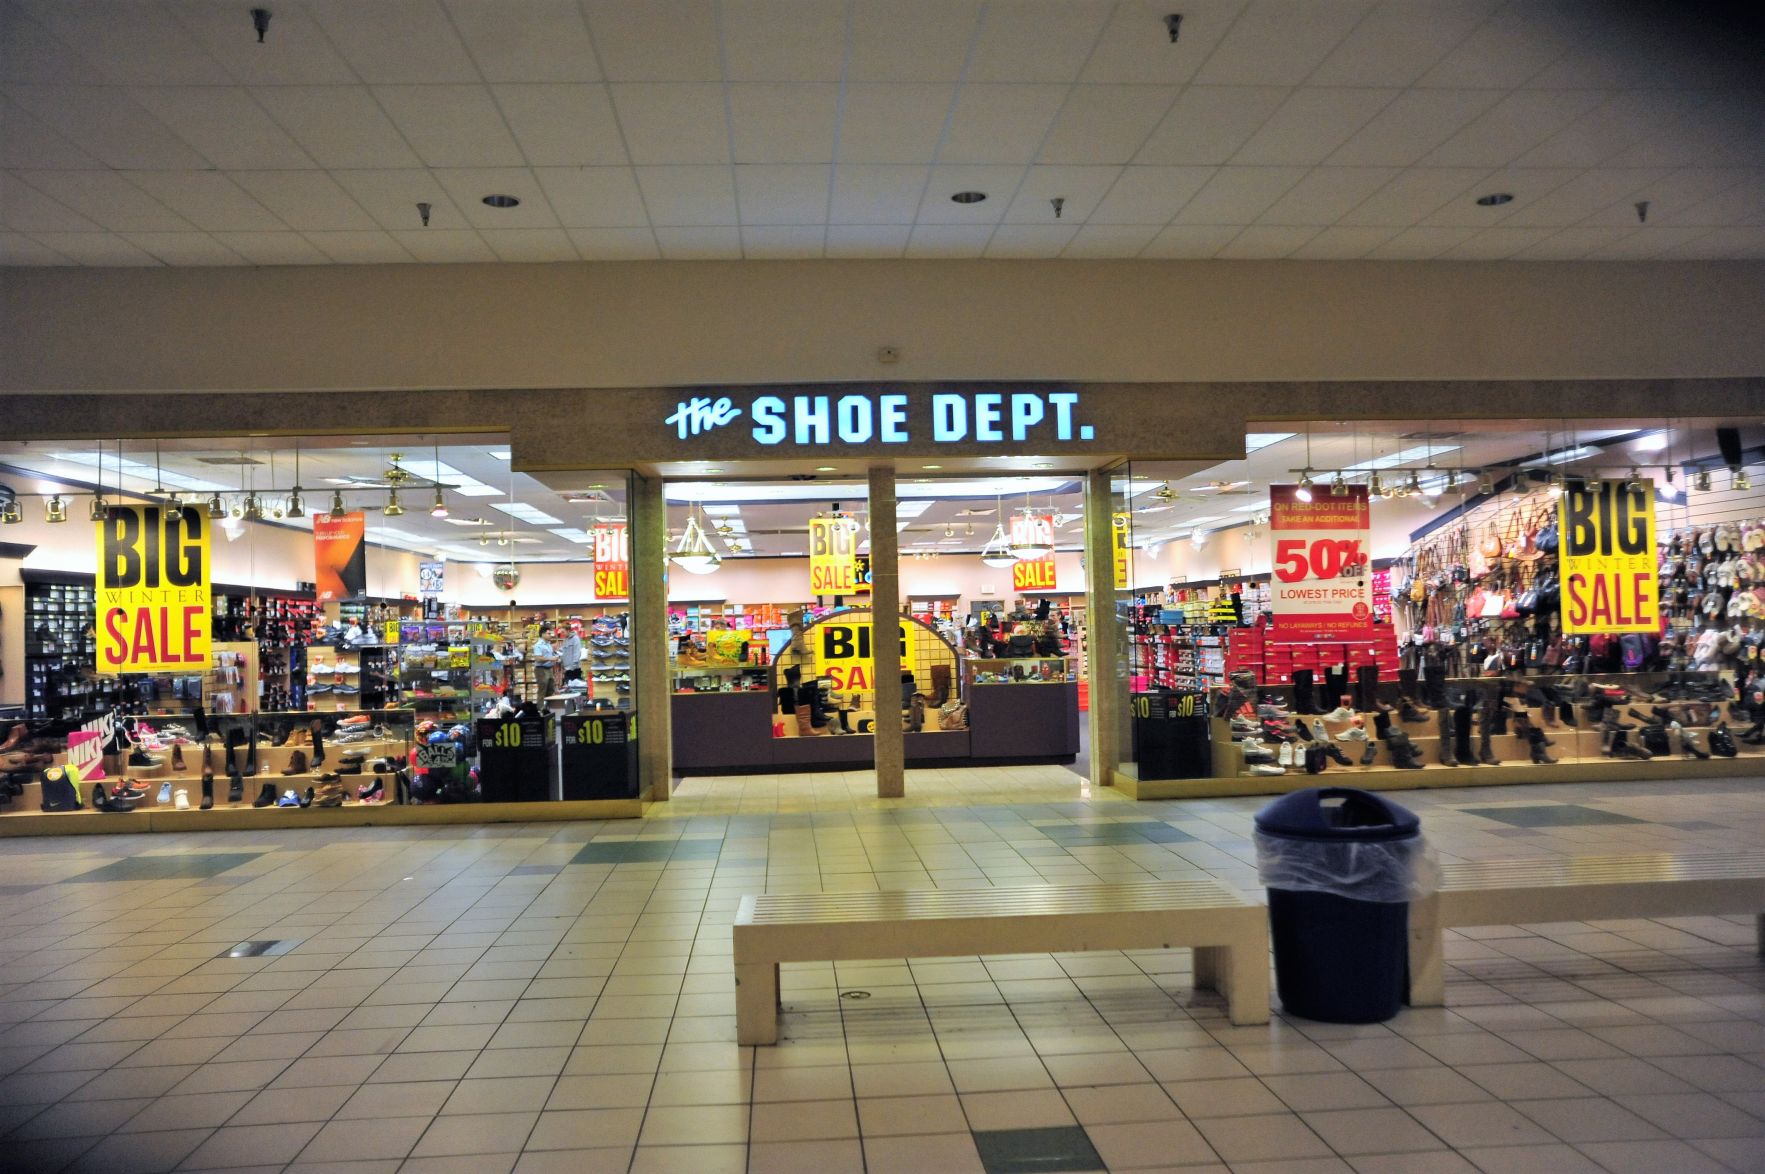 shoe dept in mall